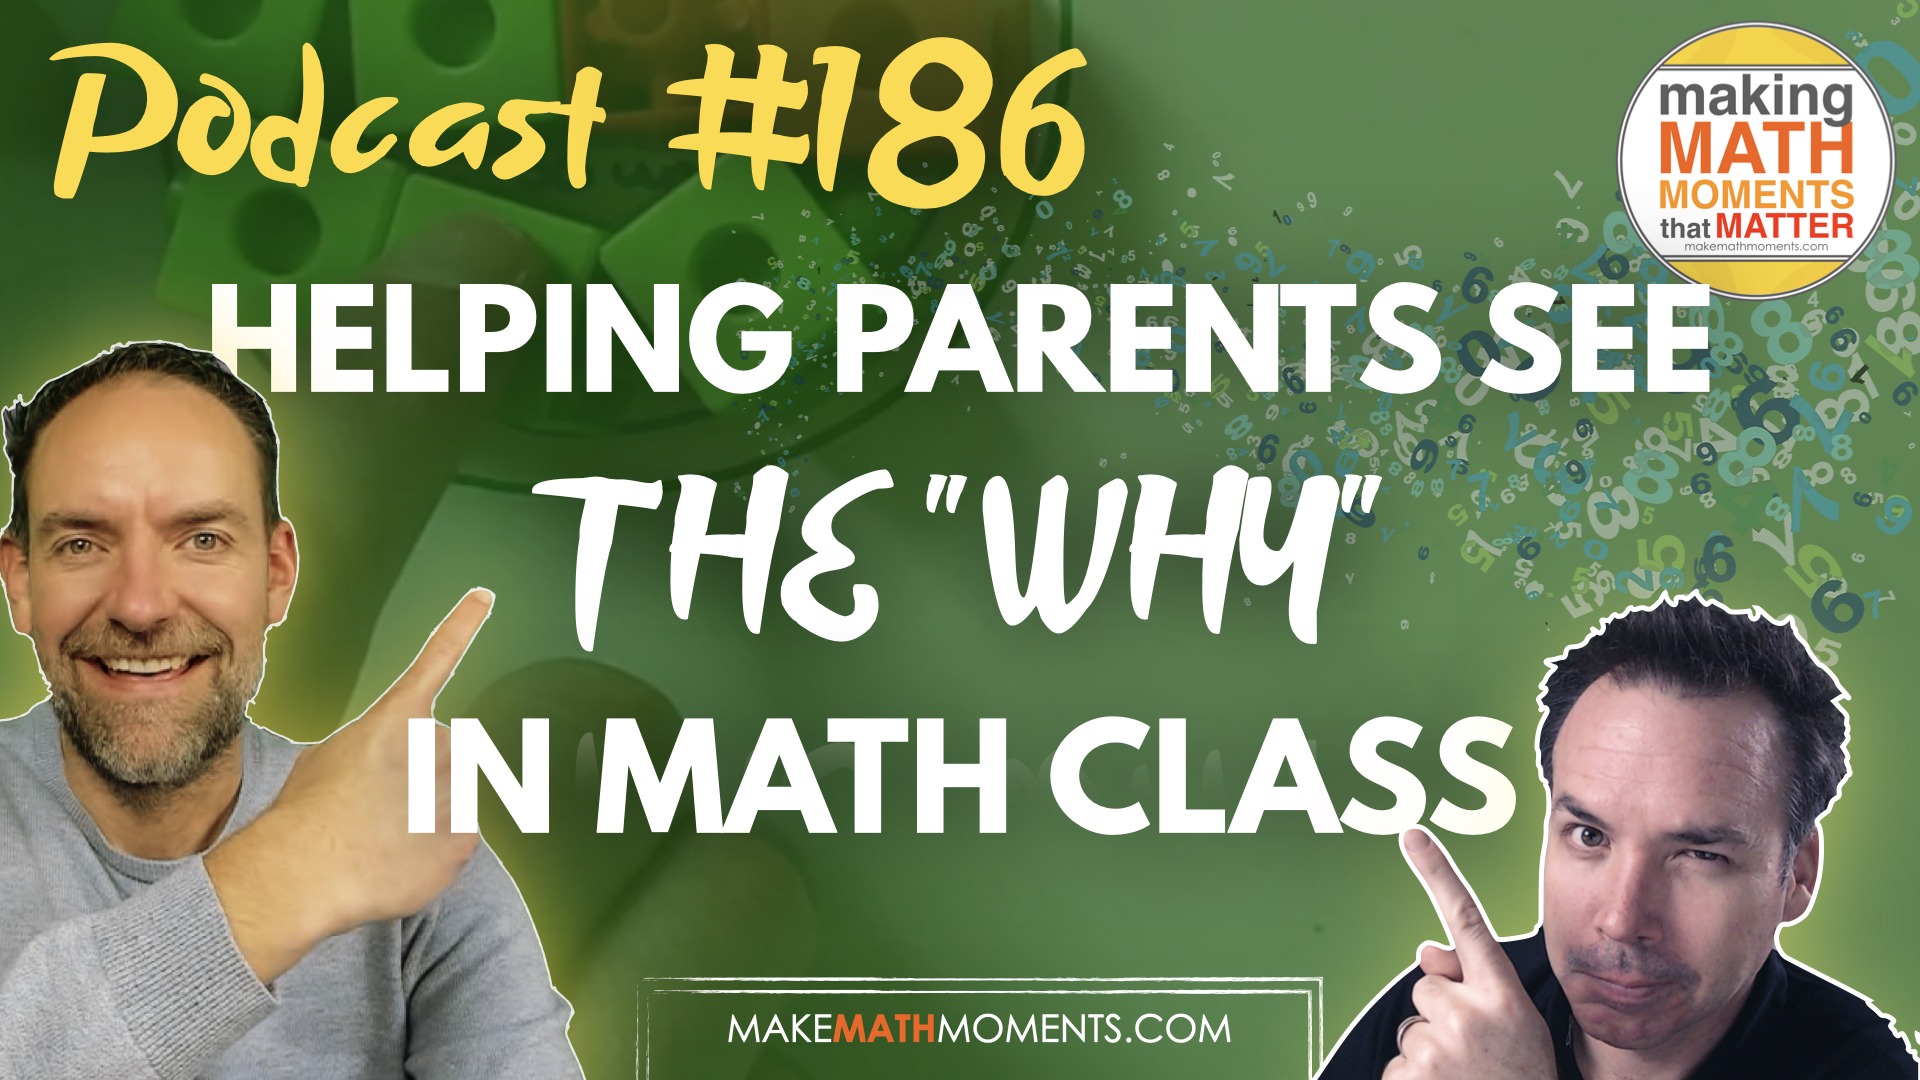 Episode #186: Helping Parents to See The “Why” In Math Class – A Math Mentoring Moment